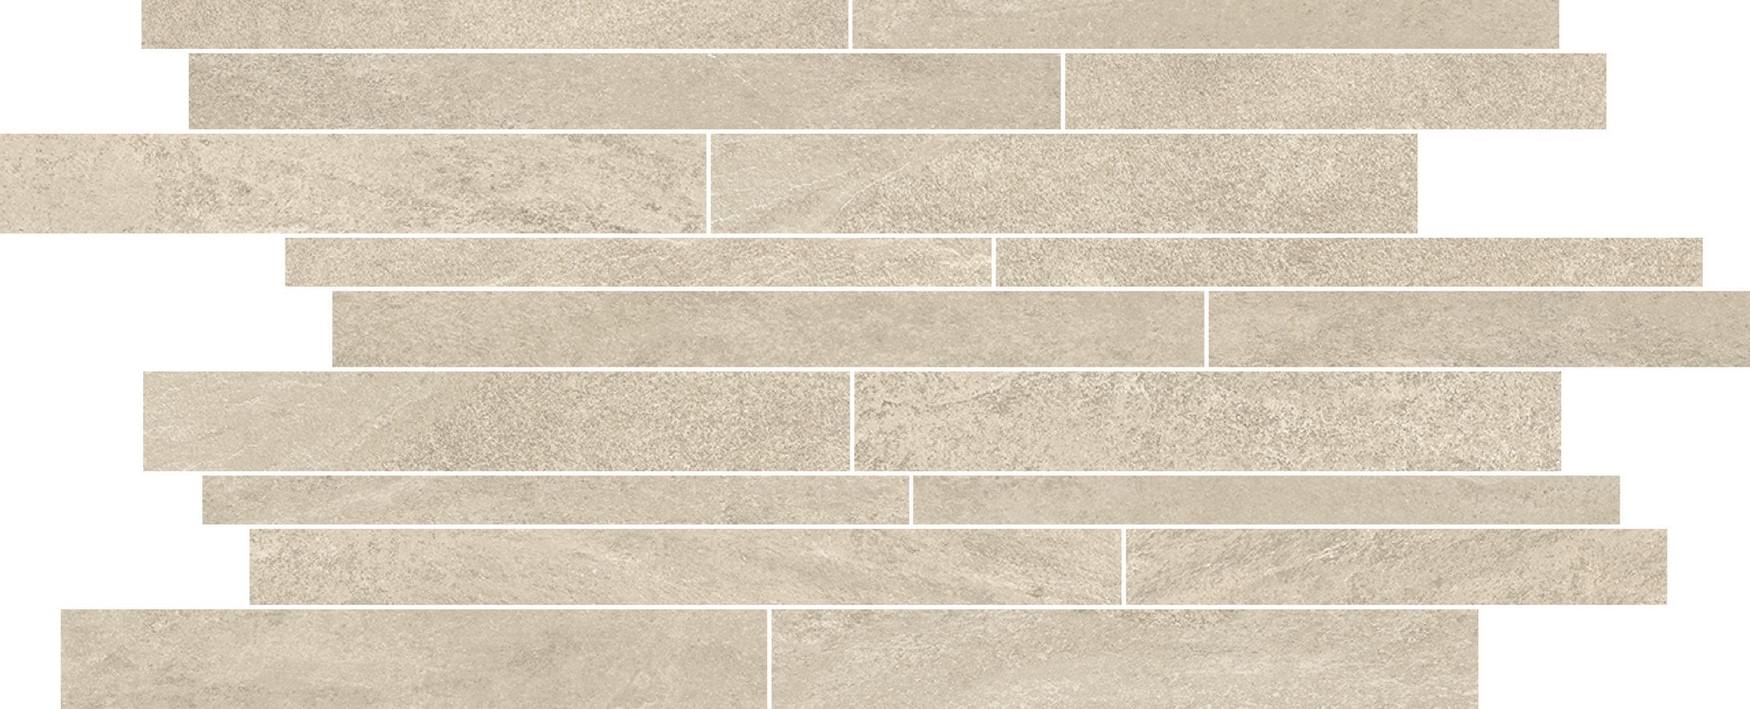 Novabell Norgestone Muretto Taupe 30x60